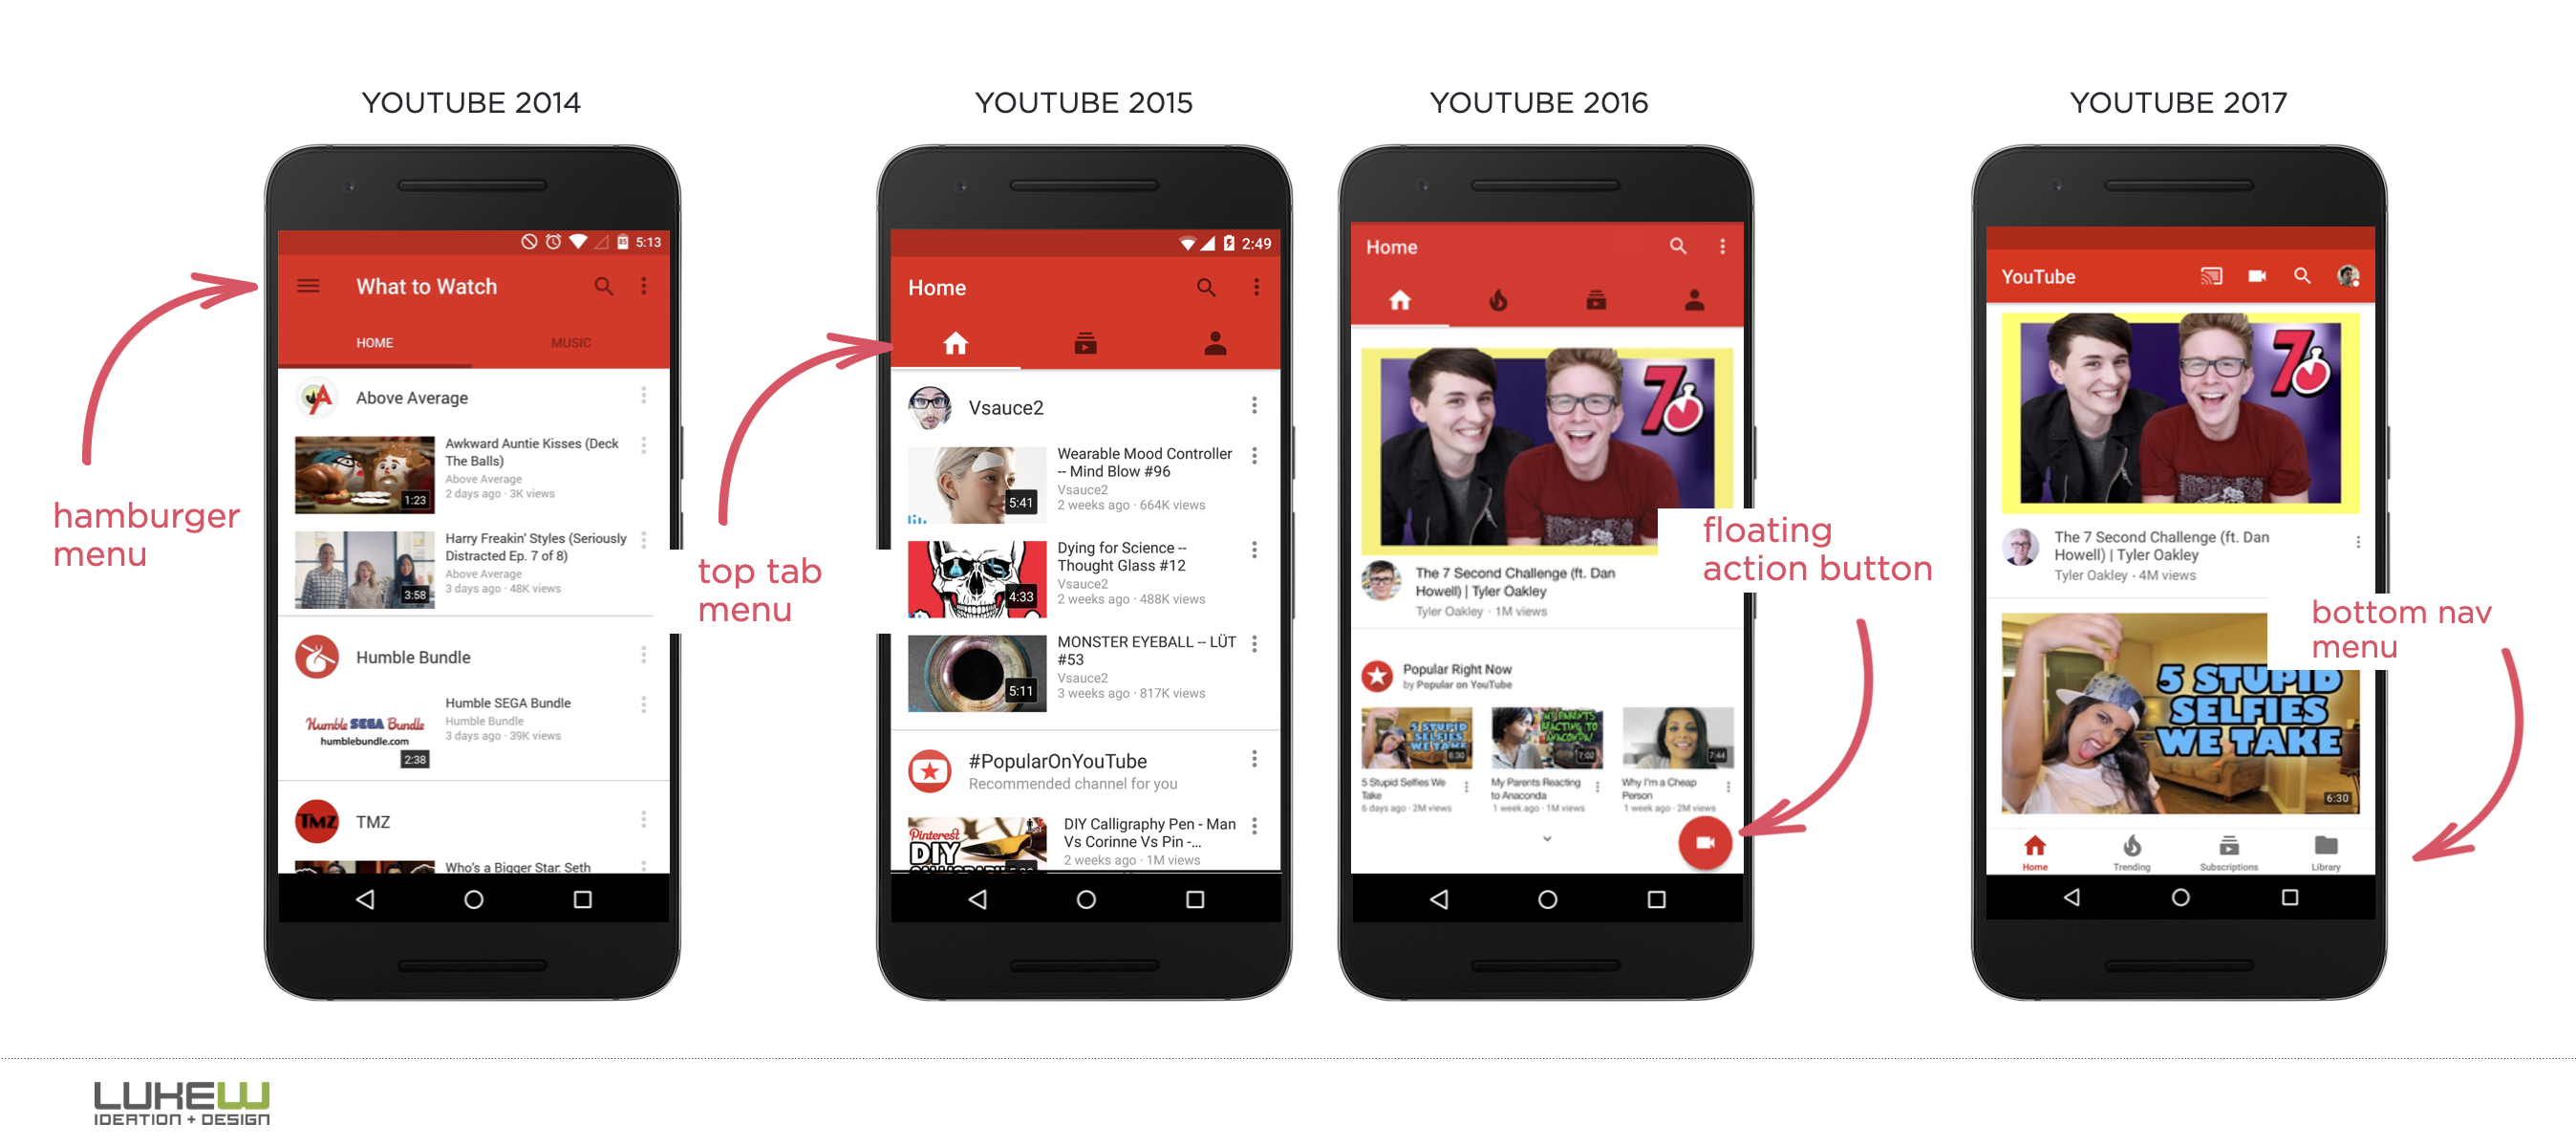 Design is never done: the YouTube Android app  edition